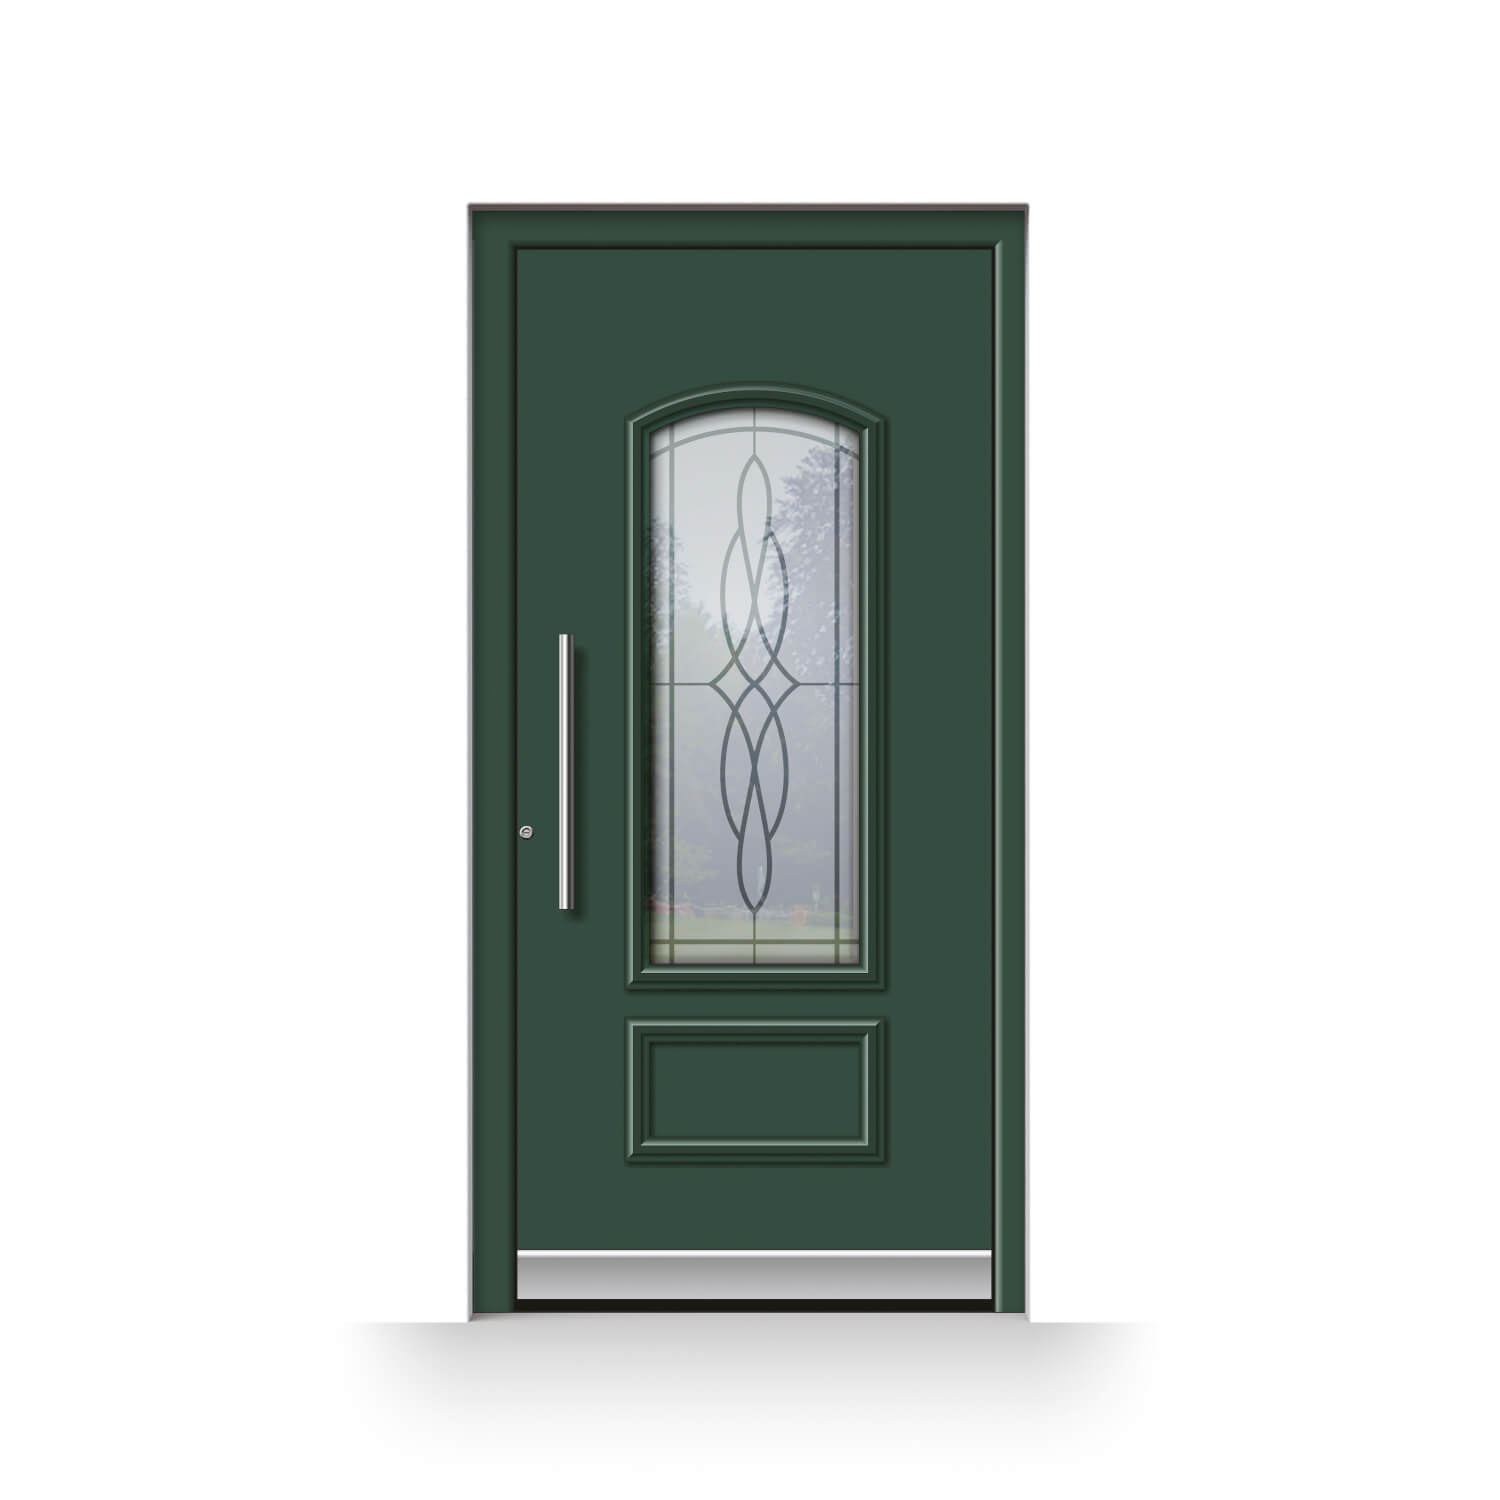 Rome front door in green with a glass insert